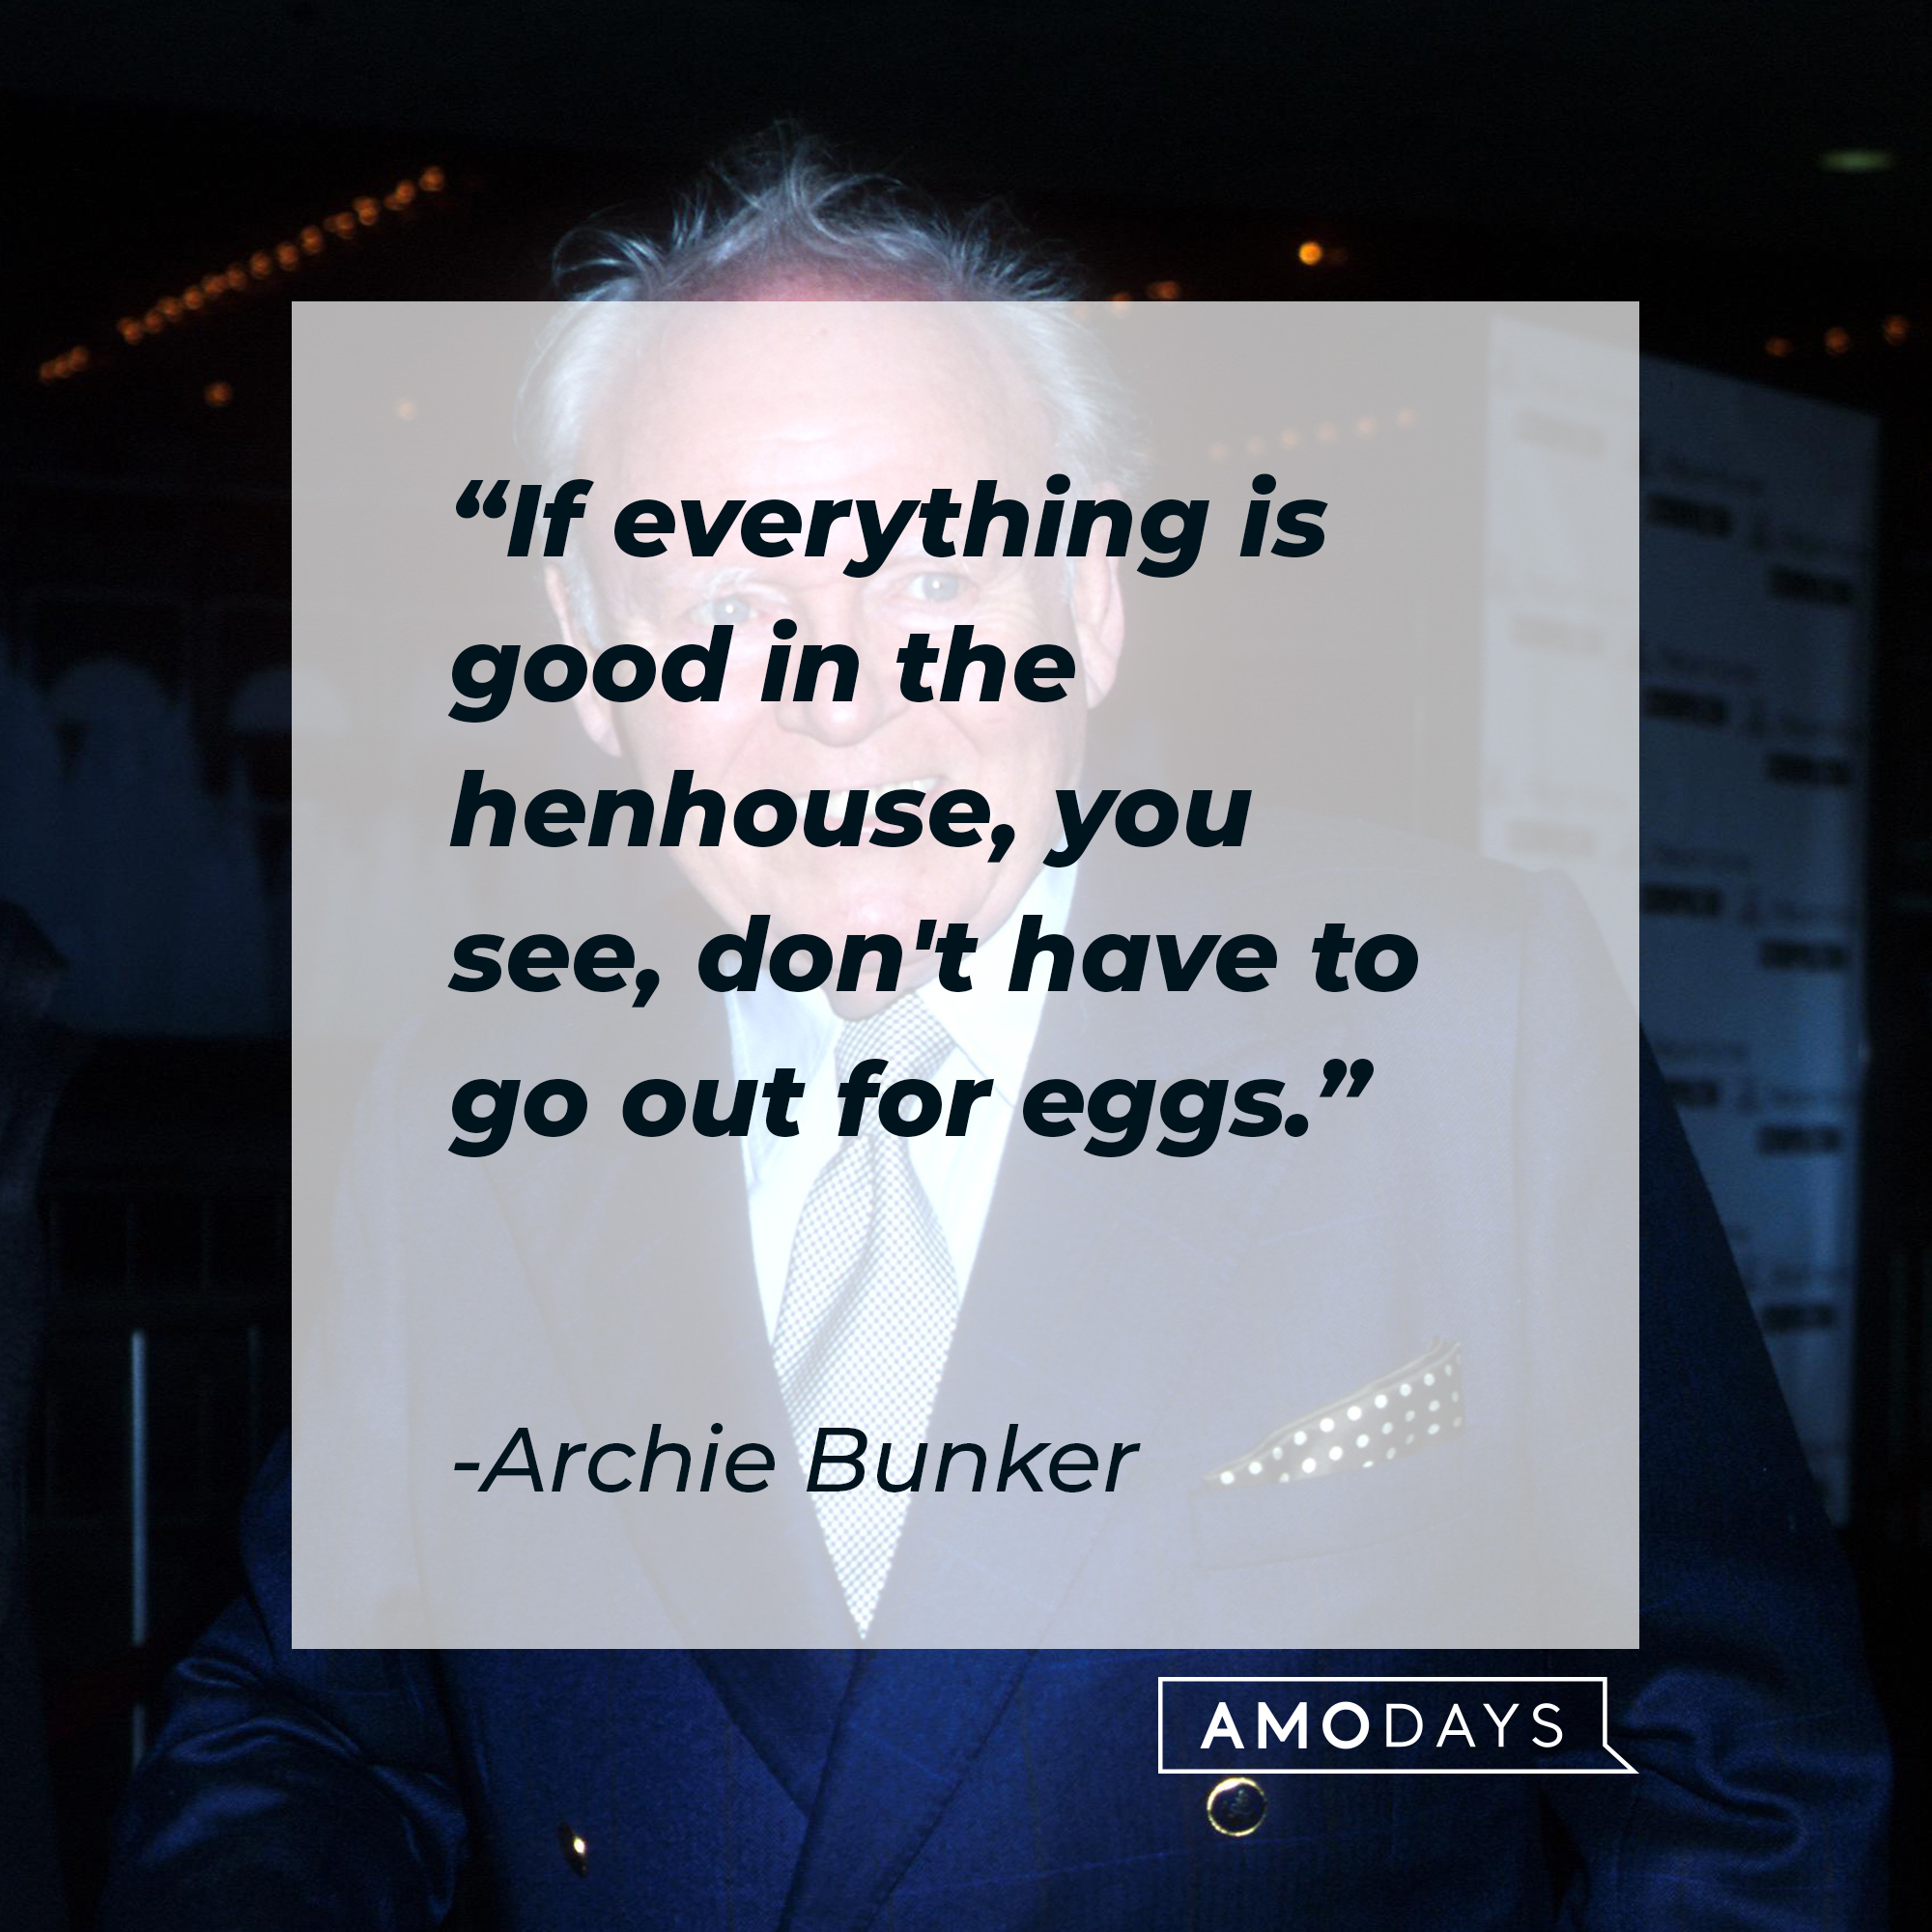 Archie Bunker's quote, "If everything is good in the henhouse, you see, don't have to go out for eggs." | Source: Getty Images